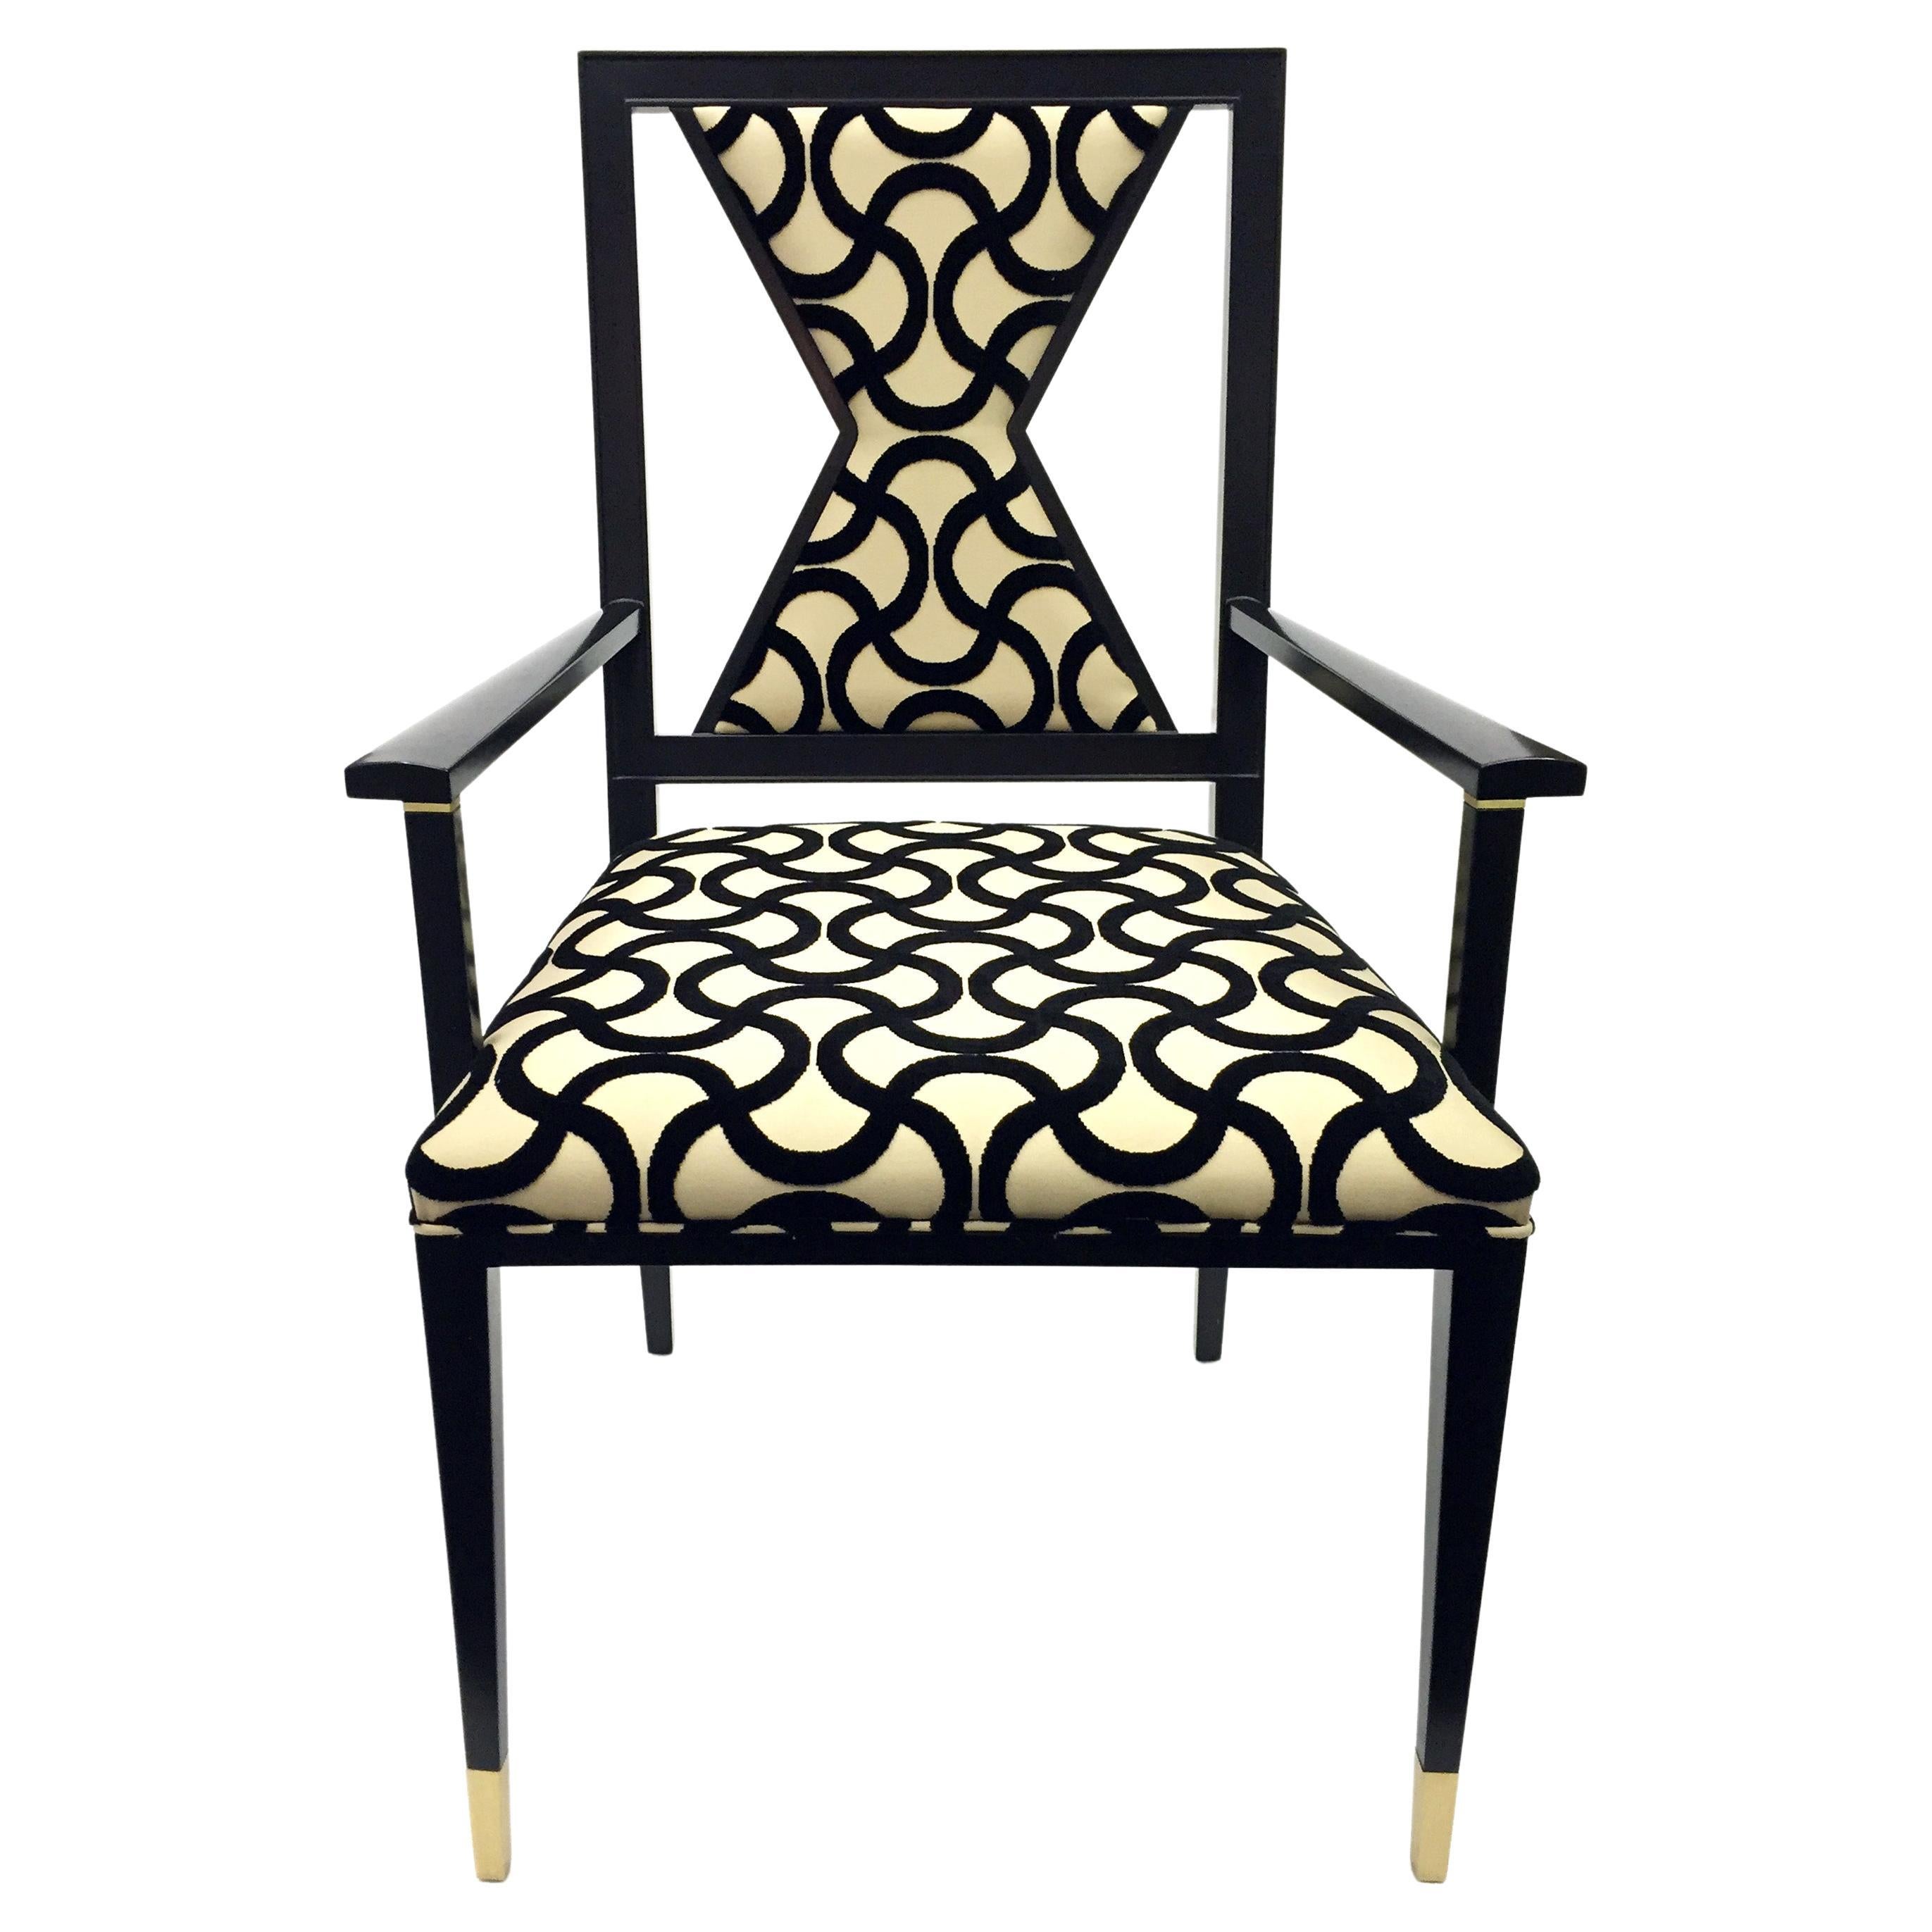 Wooden Armchair with Geometrical Backrest and Pattern Upholstery by Juan Montoya